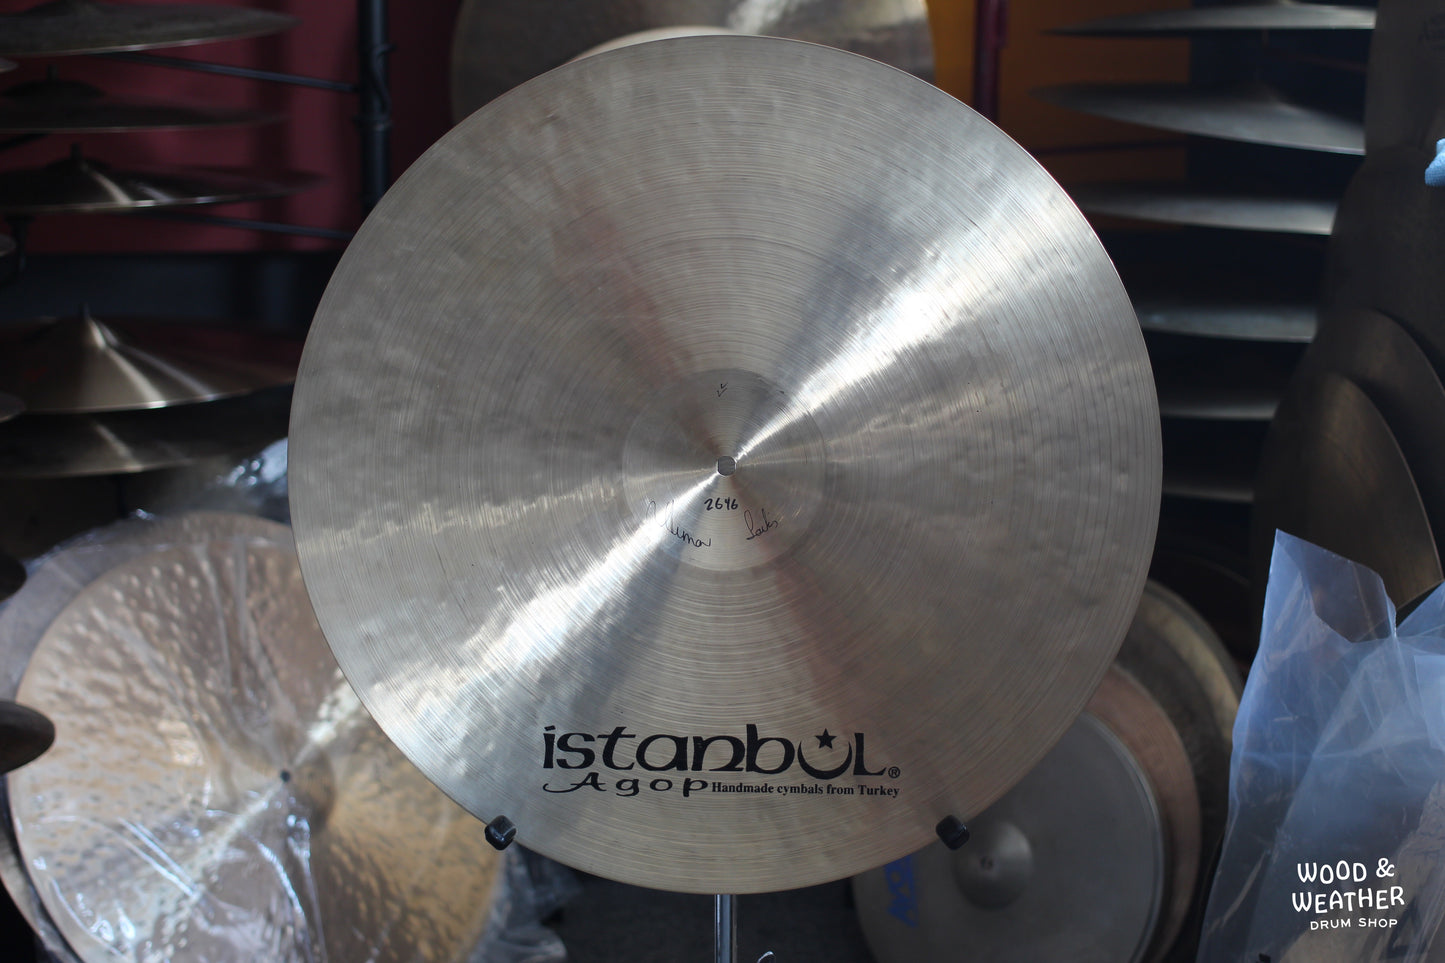 Used Istanbul Agop 22" Special Edition Jazz Ride Cymbal 2646g